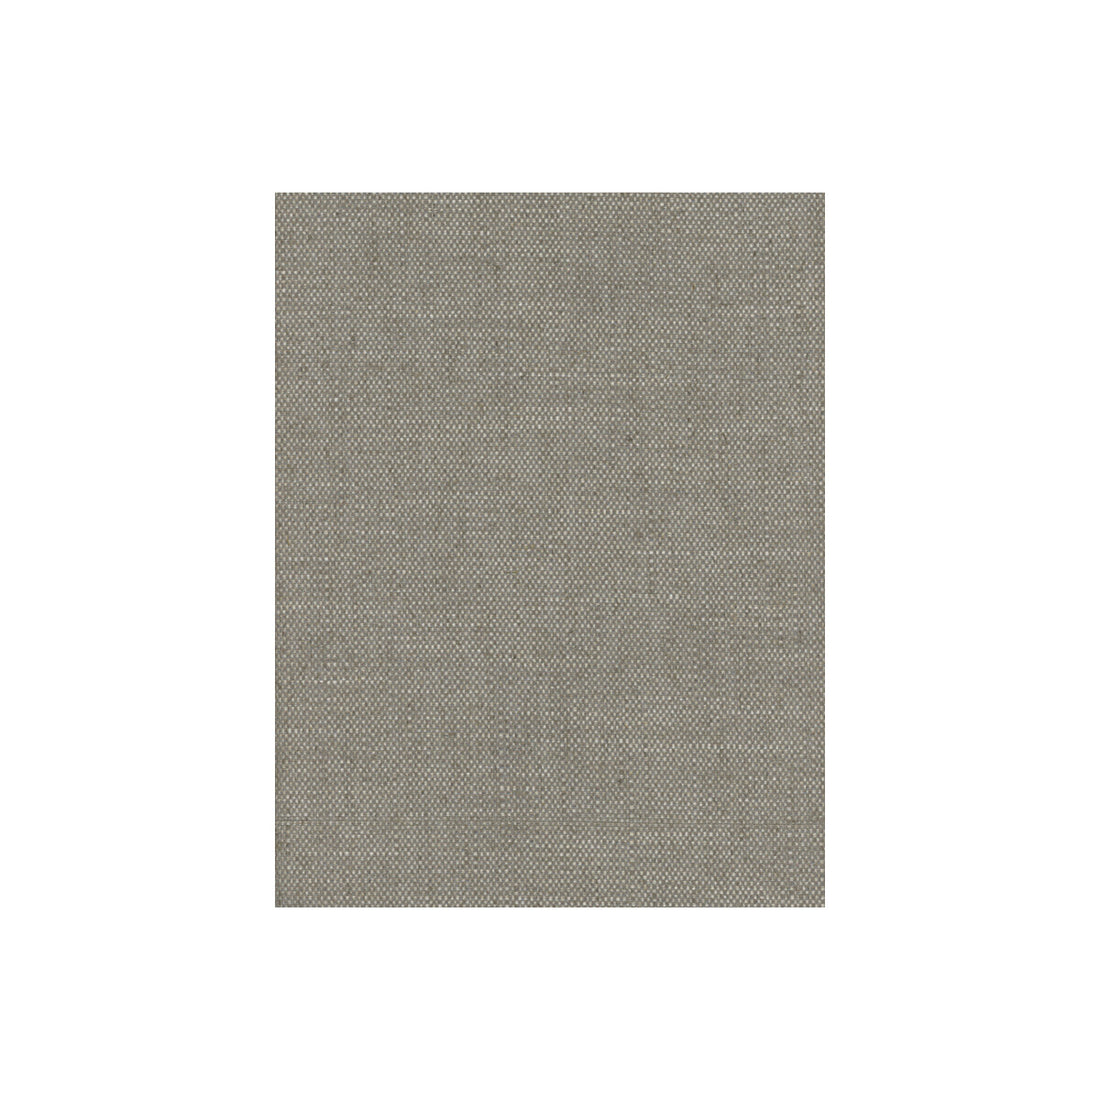 Ossington fabric in taupe color - pattern AM100179.106.0 - by Kravet Couture in the Andrew Martin Lost And Found collection